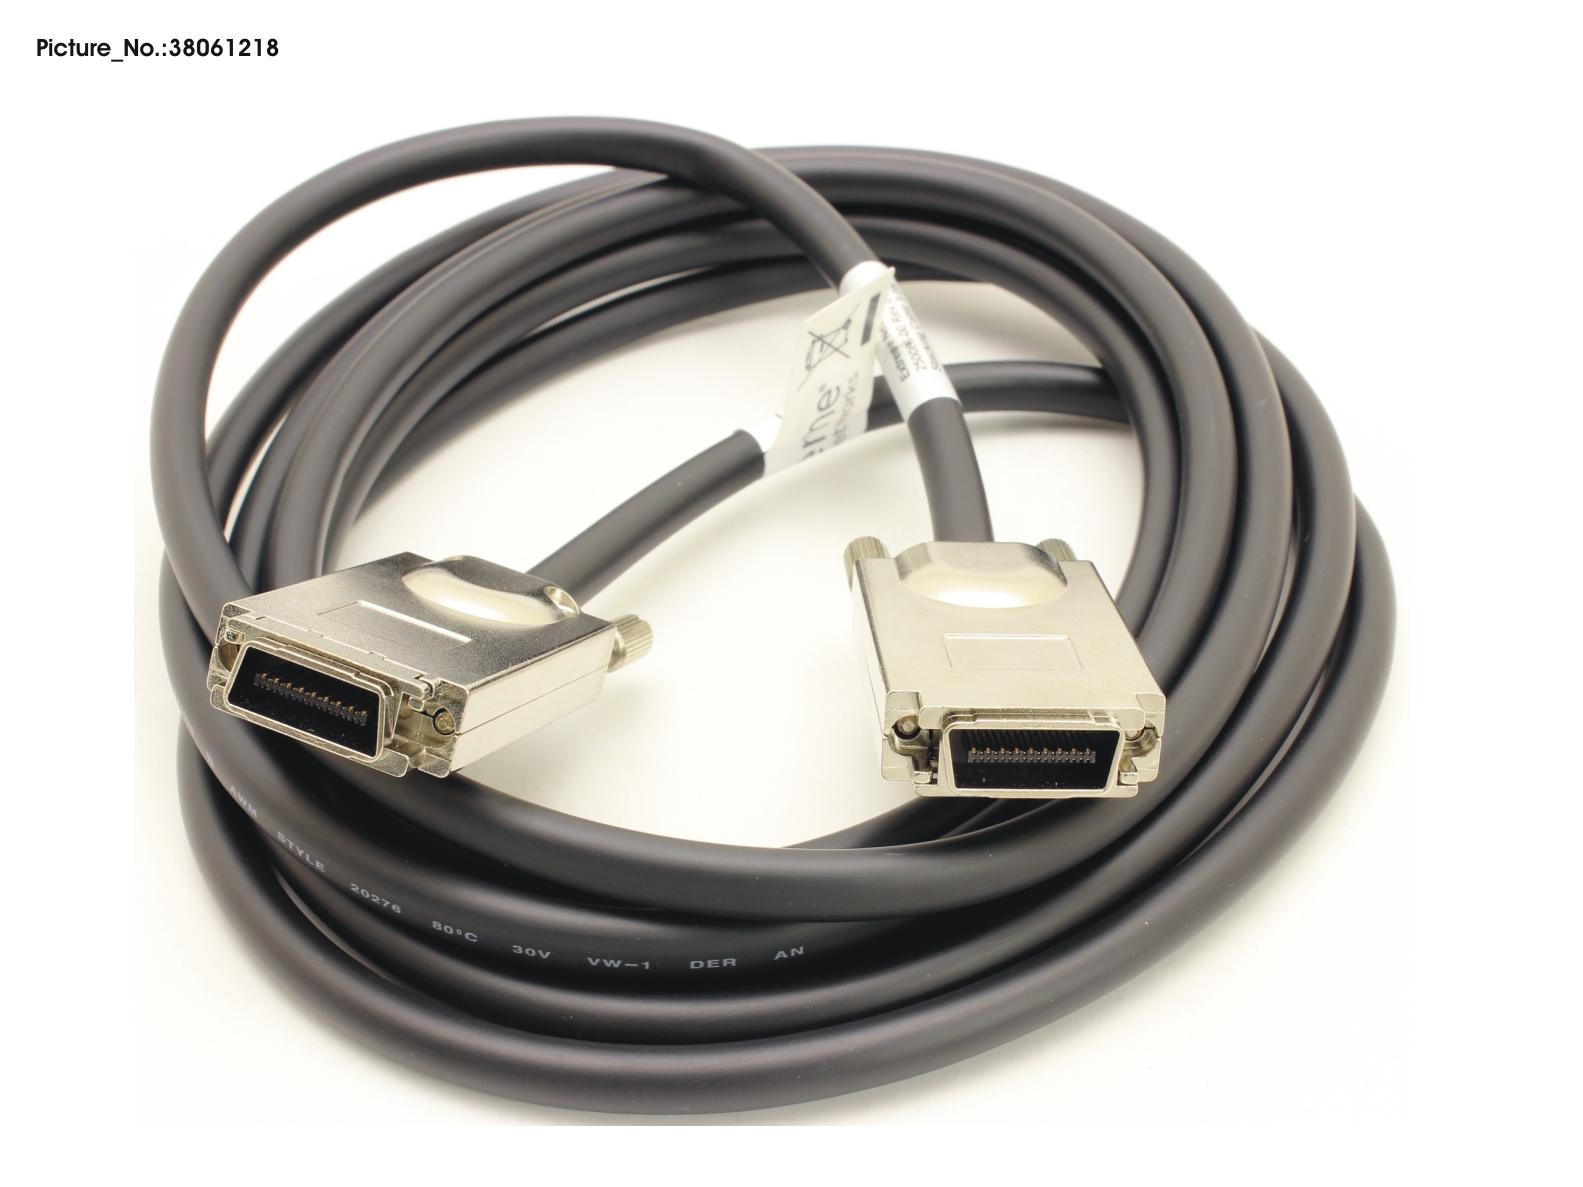 CABLE FOR SUMMITSTACK/UNISTACK, 3.0M